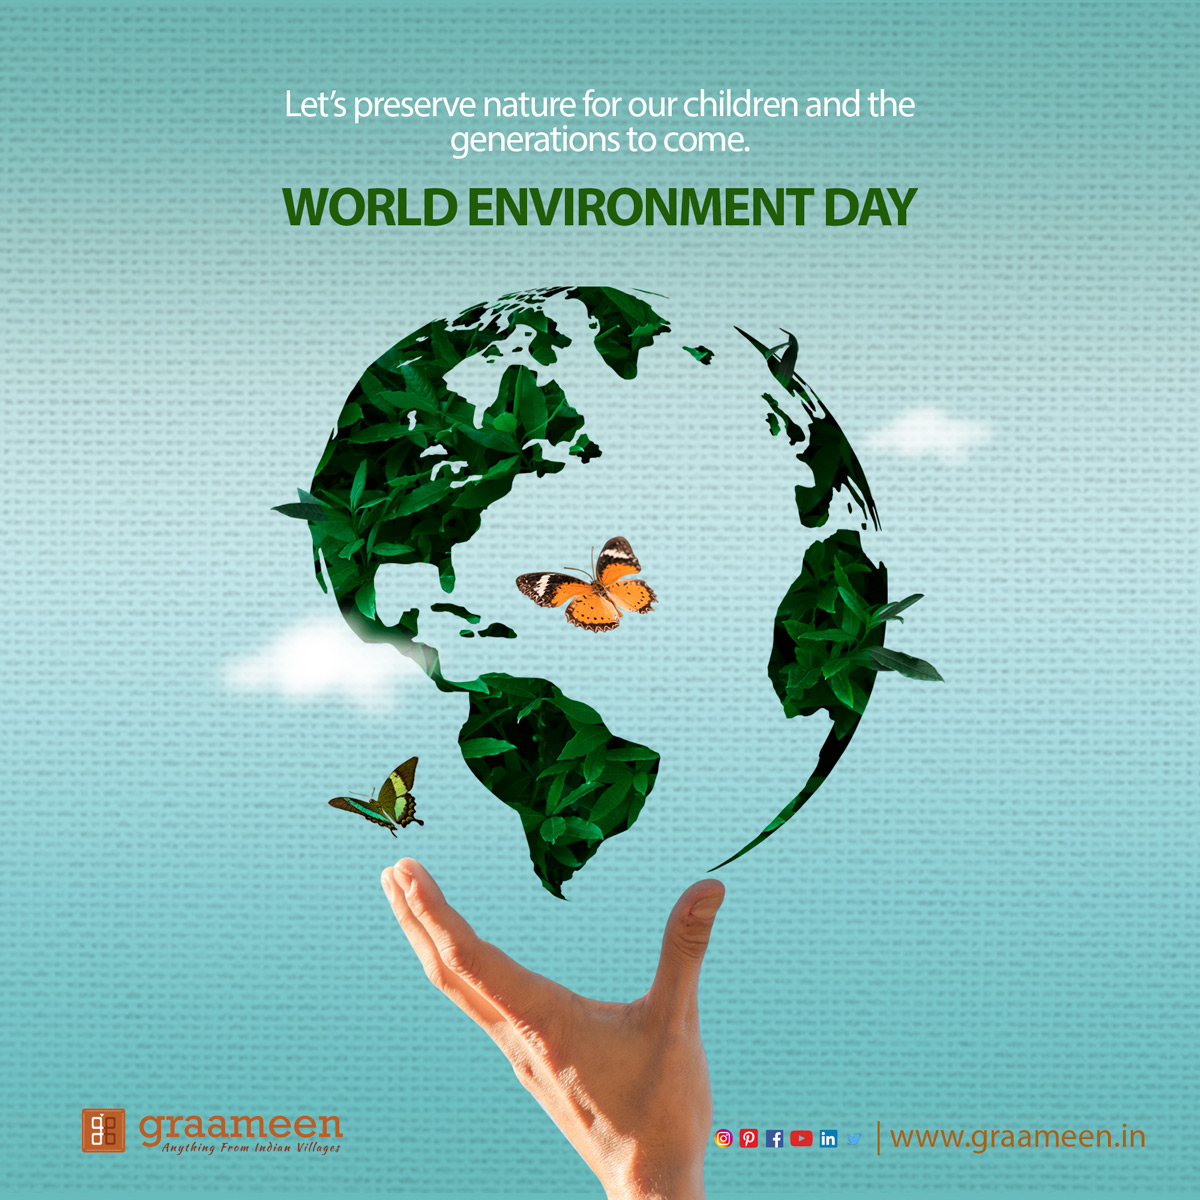 Stand up for nature! Protect the environment!
We are the generation that can make the earth a thriving home again. Let’s join hands and work together to make this goal a reality.
#GenerationRestoration 
graameen.in
.
.
.
#WorldEnvironmentalDay #enviornmentday2021